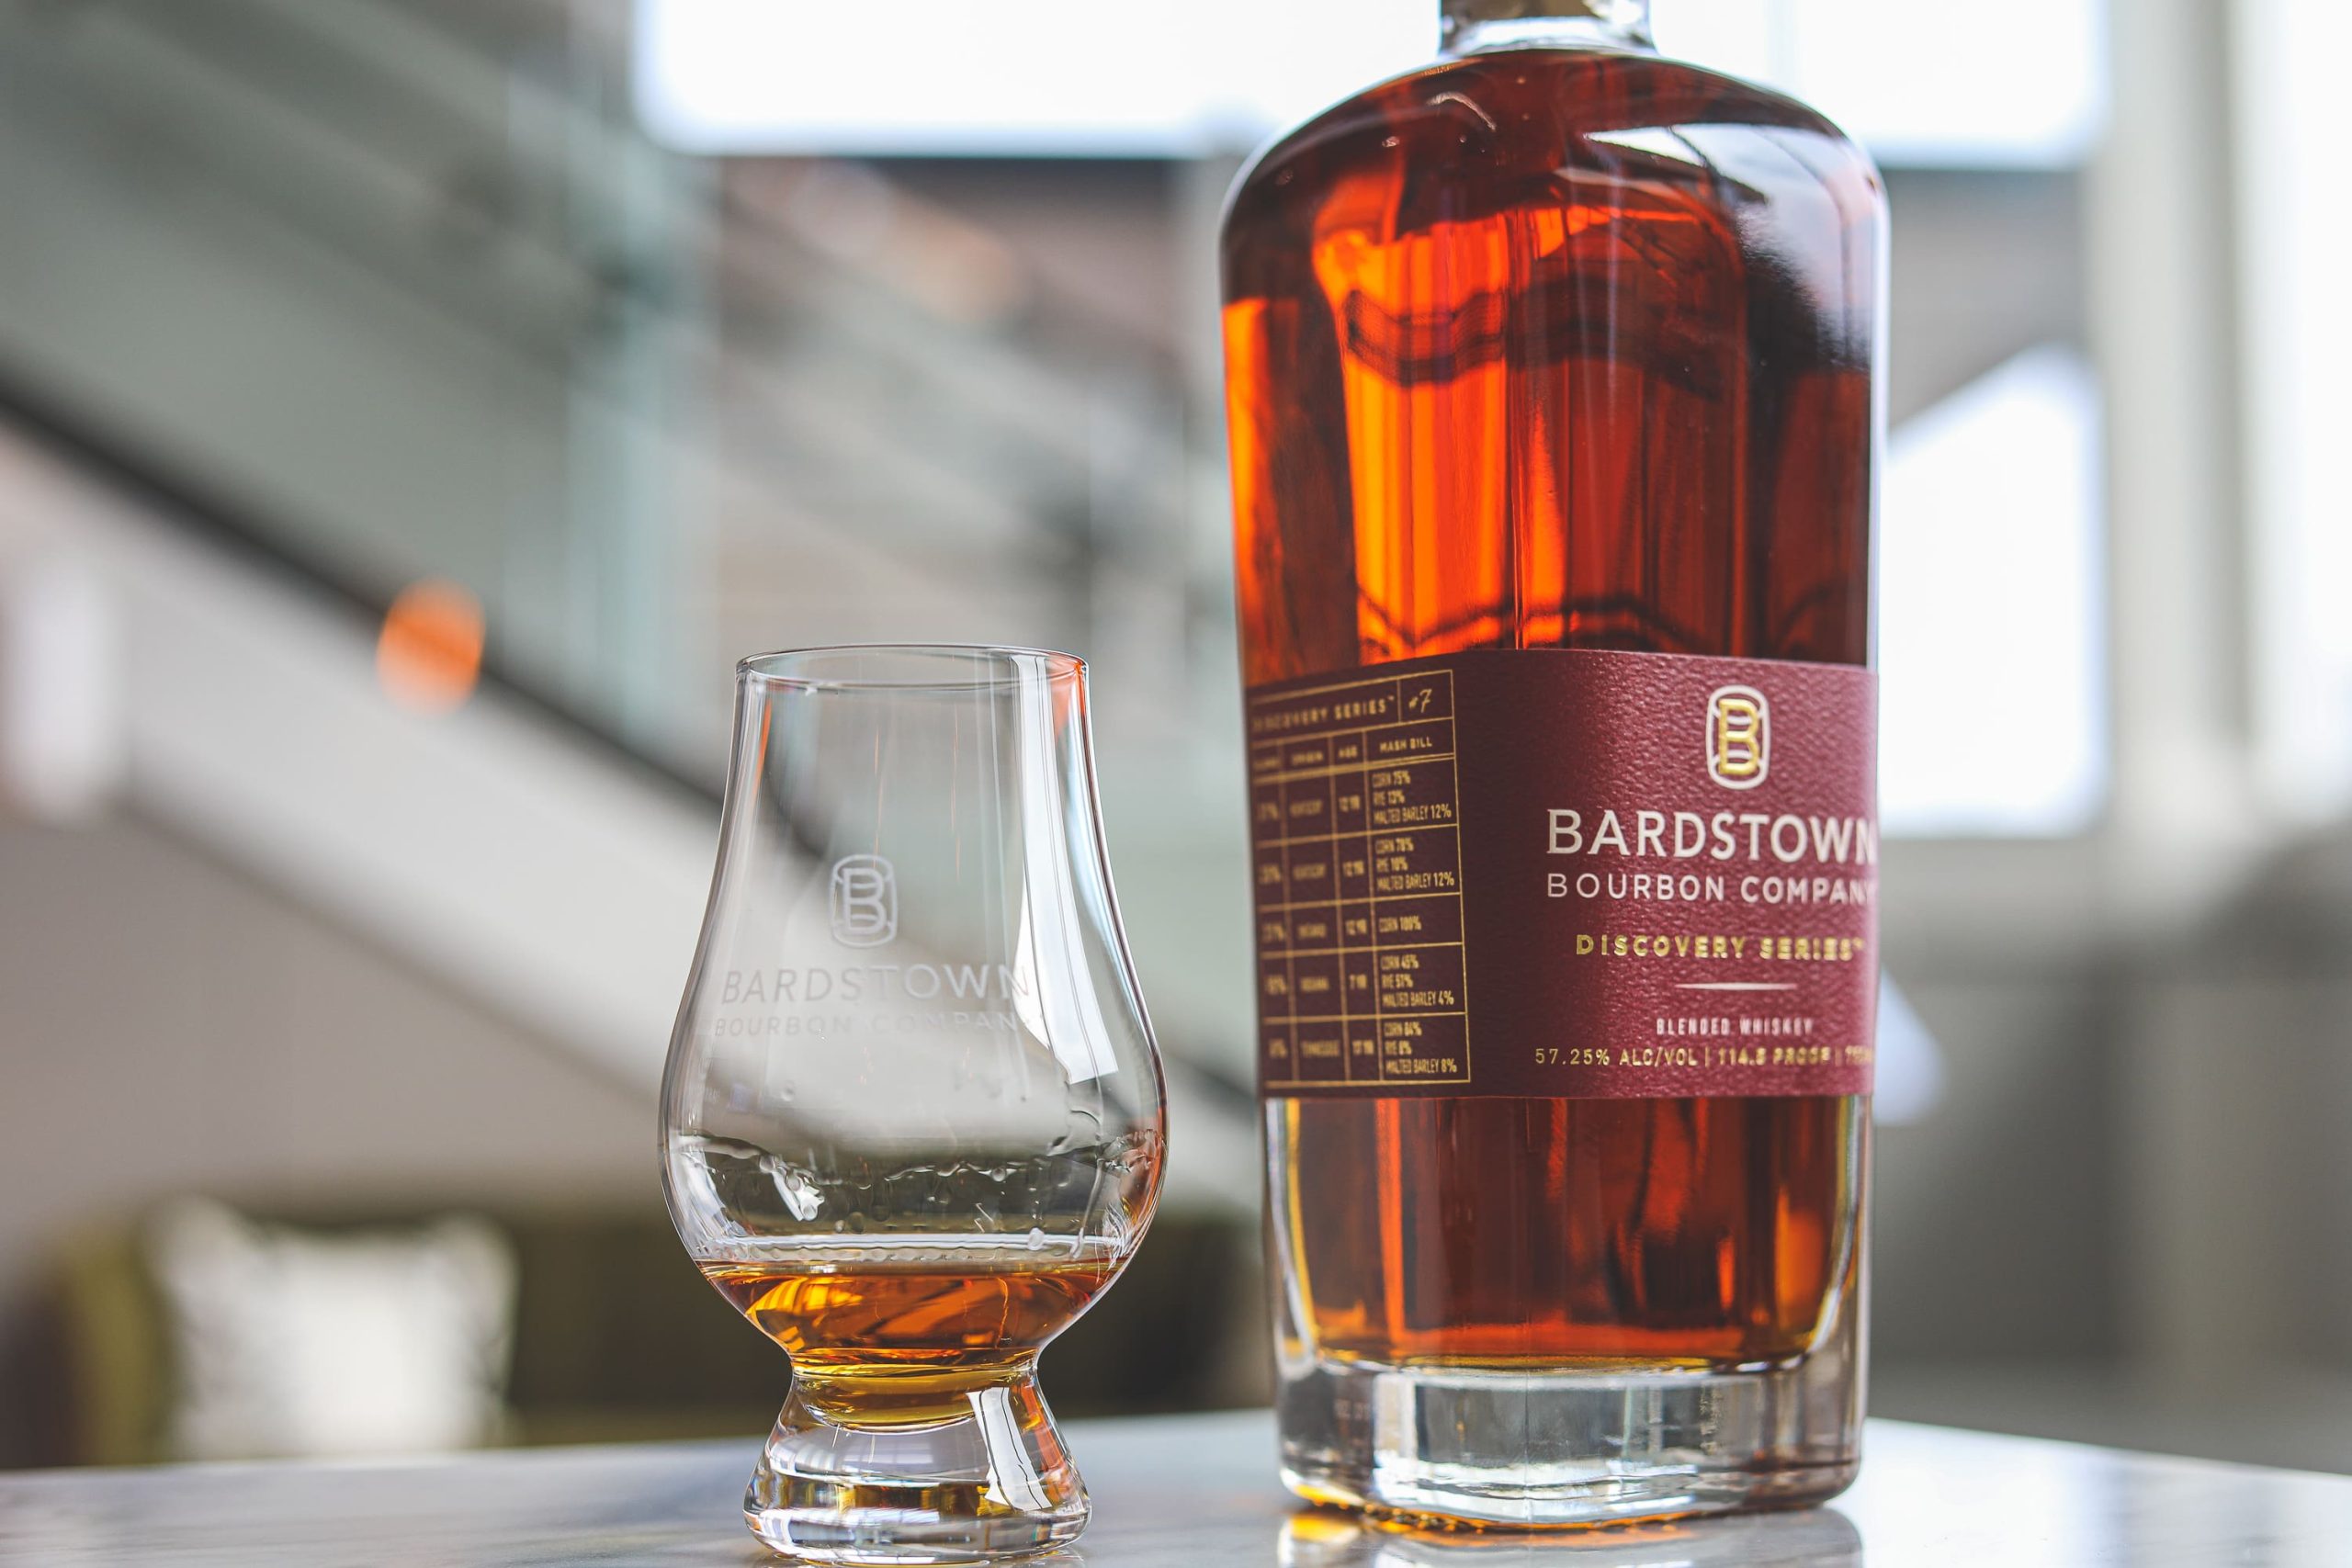 Bardstown Bourbon Co Discovery and Fusion Series